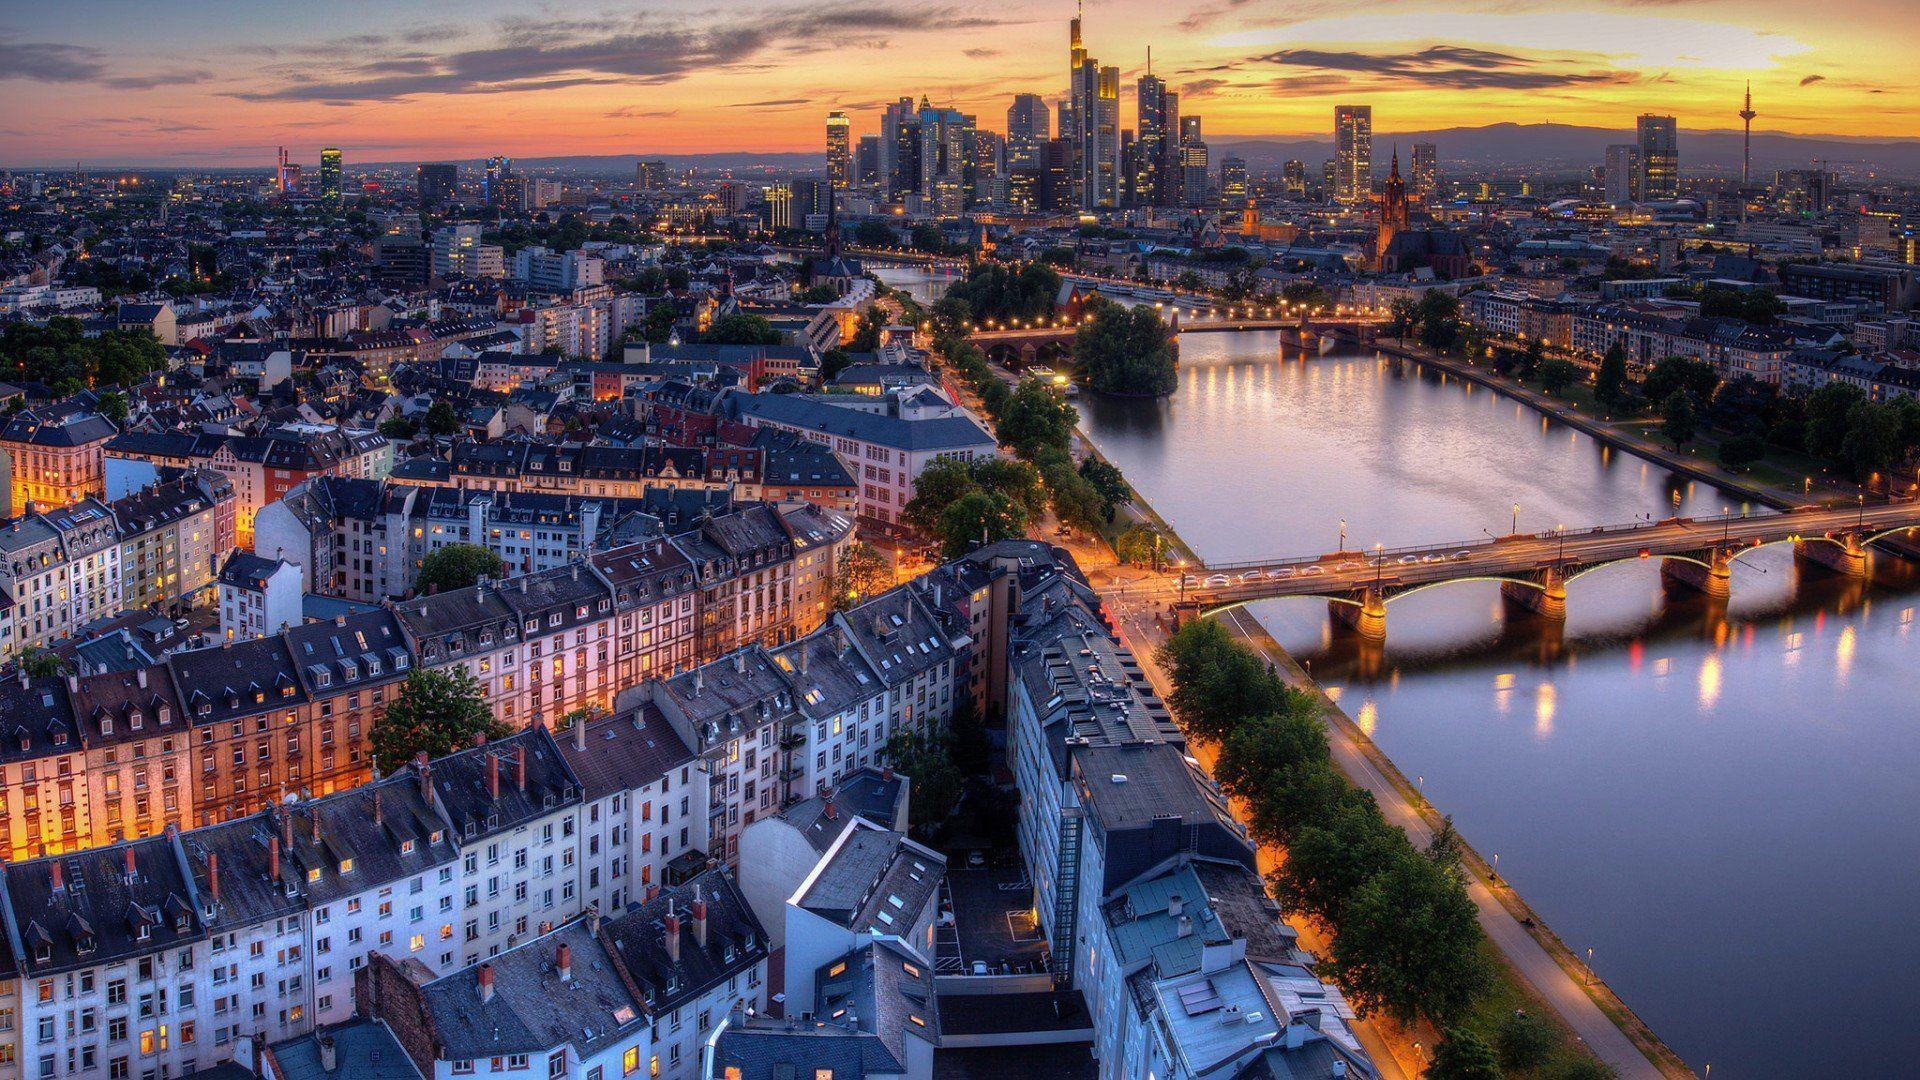 Entire Panoramic View of Frankfurt, Germany